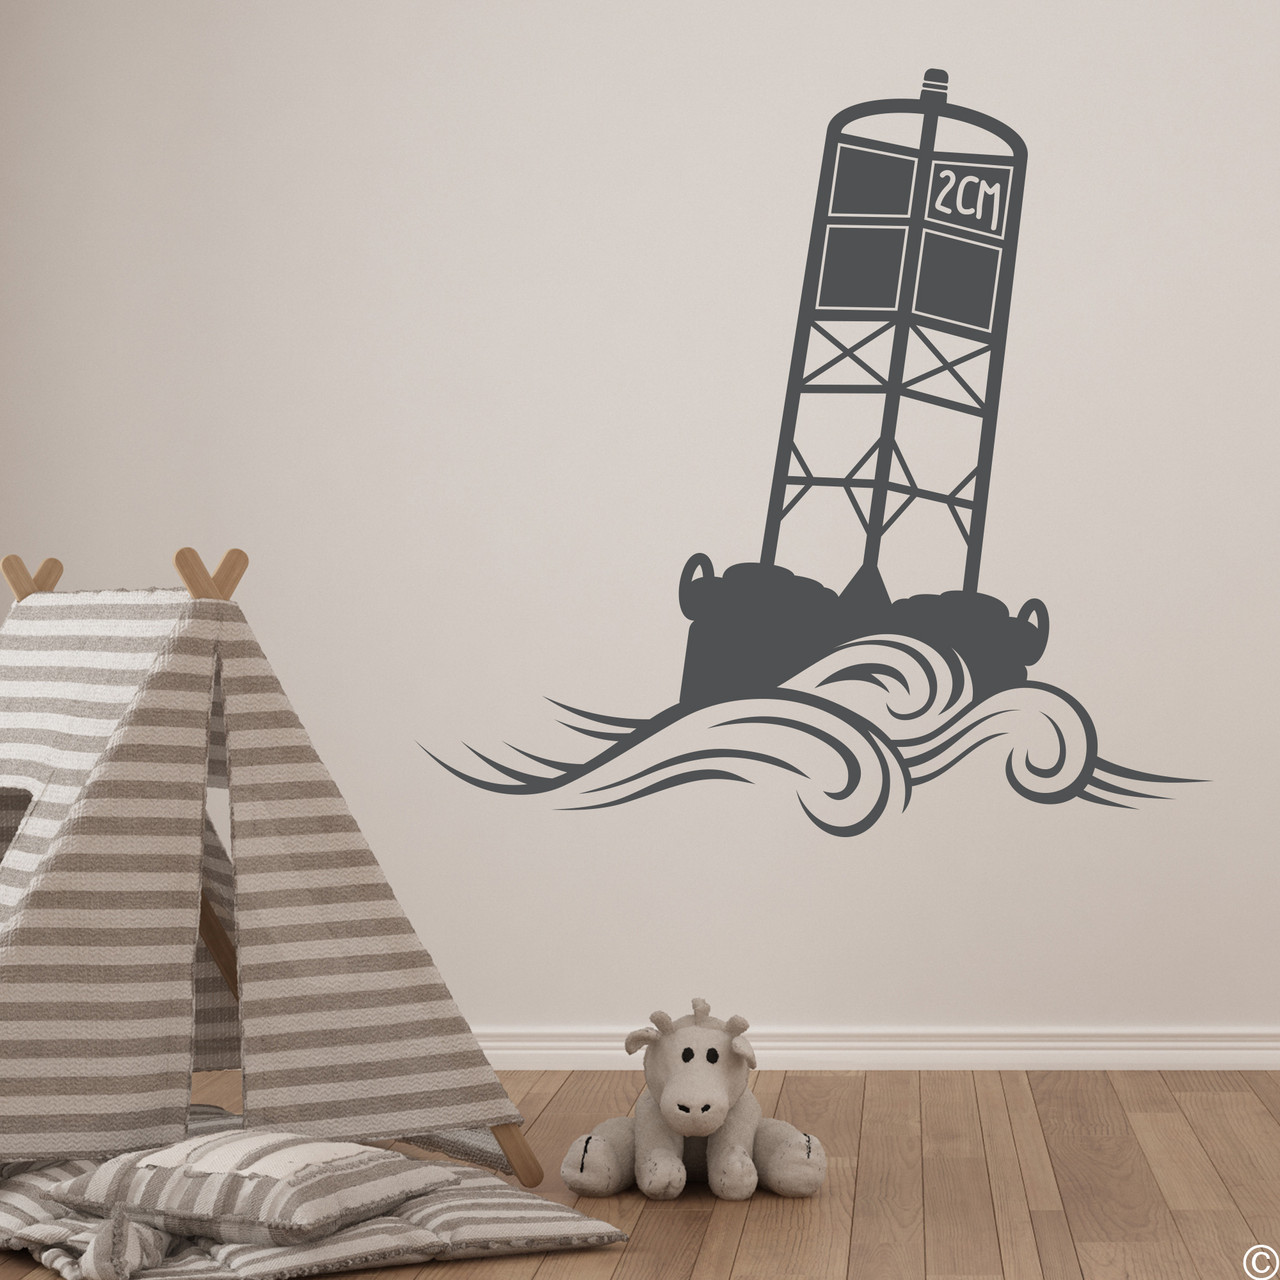 The Cape May Harbor 2CM Buoy wall decal in dark grey.